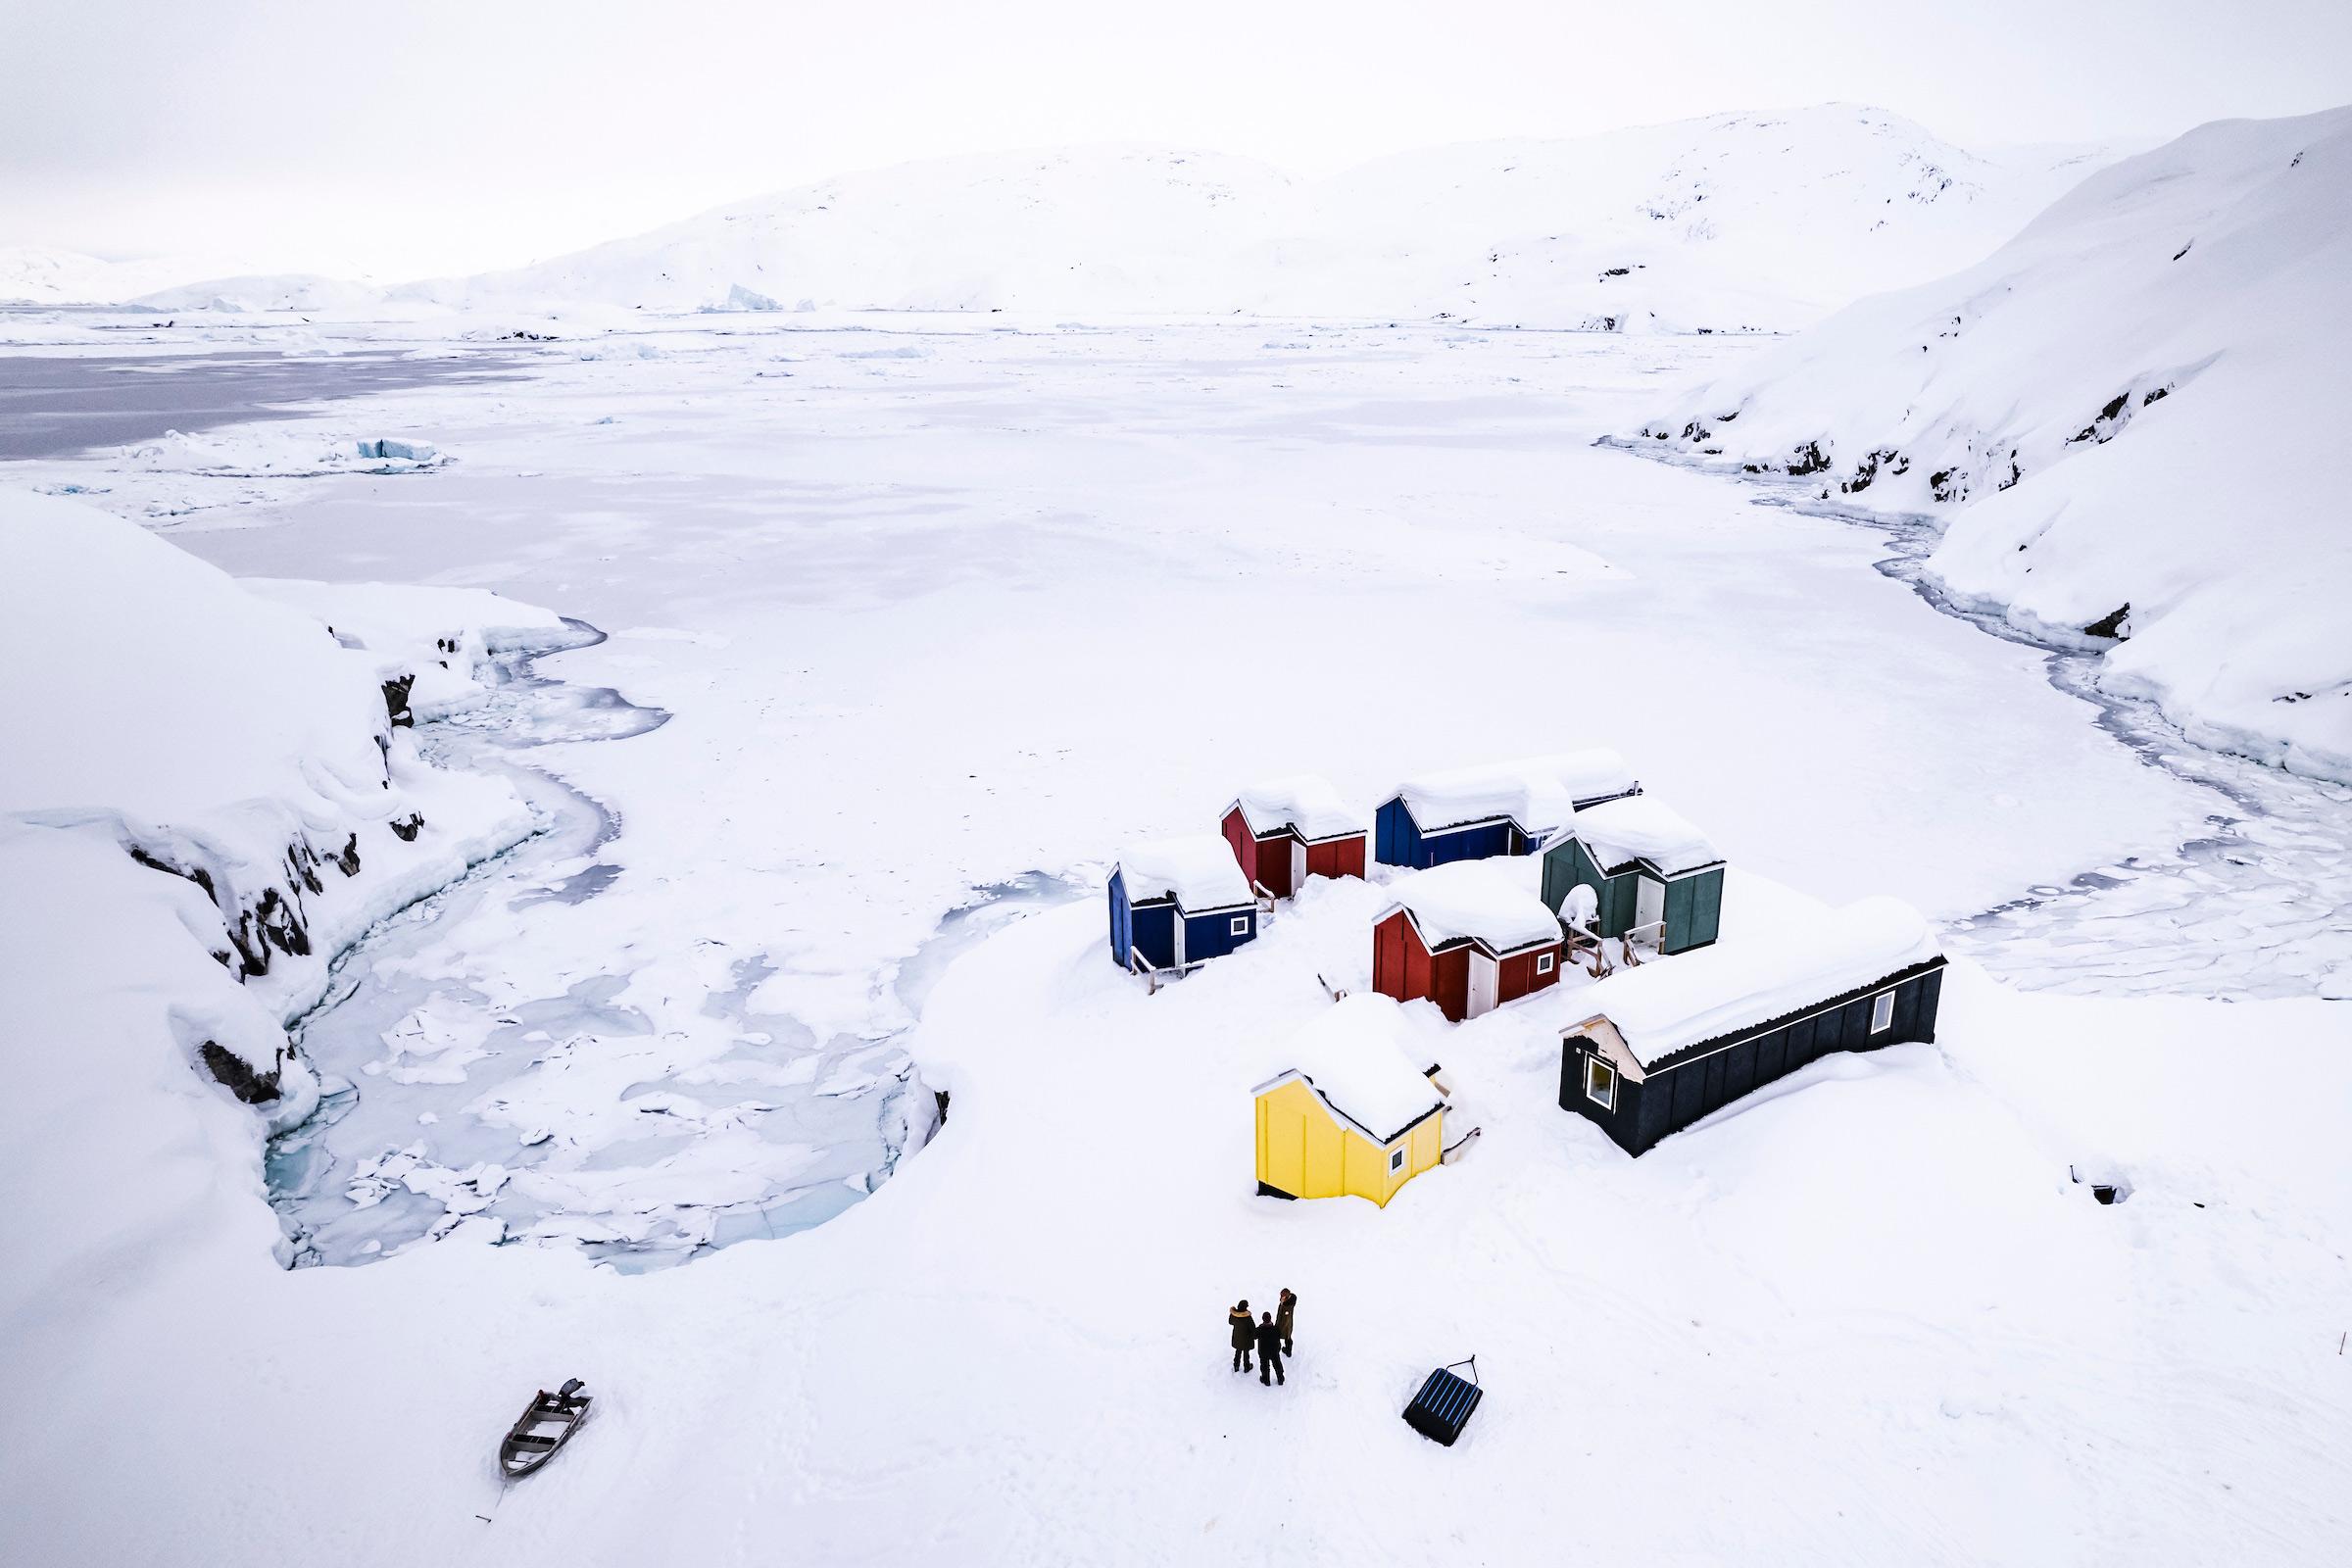 The camp by Arctioc Dream. The Icecamp. Photo by Aningaaq Rosing Carlsen - Visit Greenland (1)